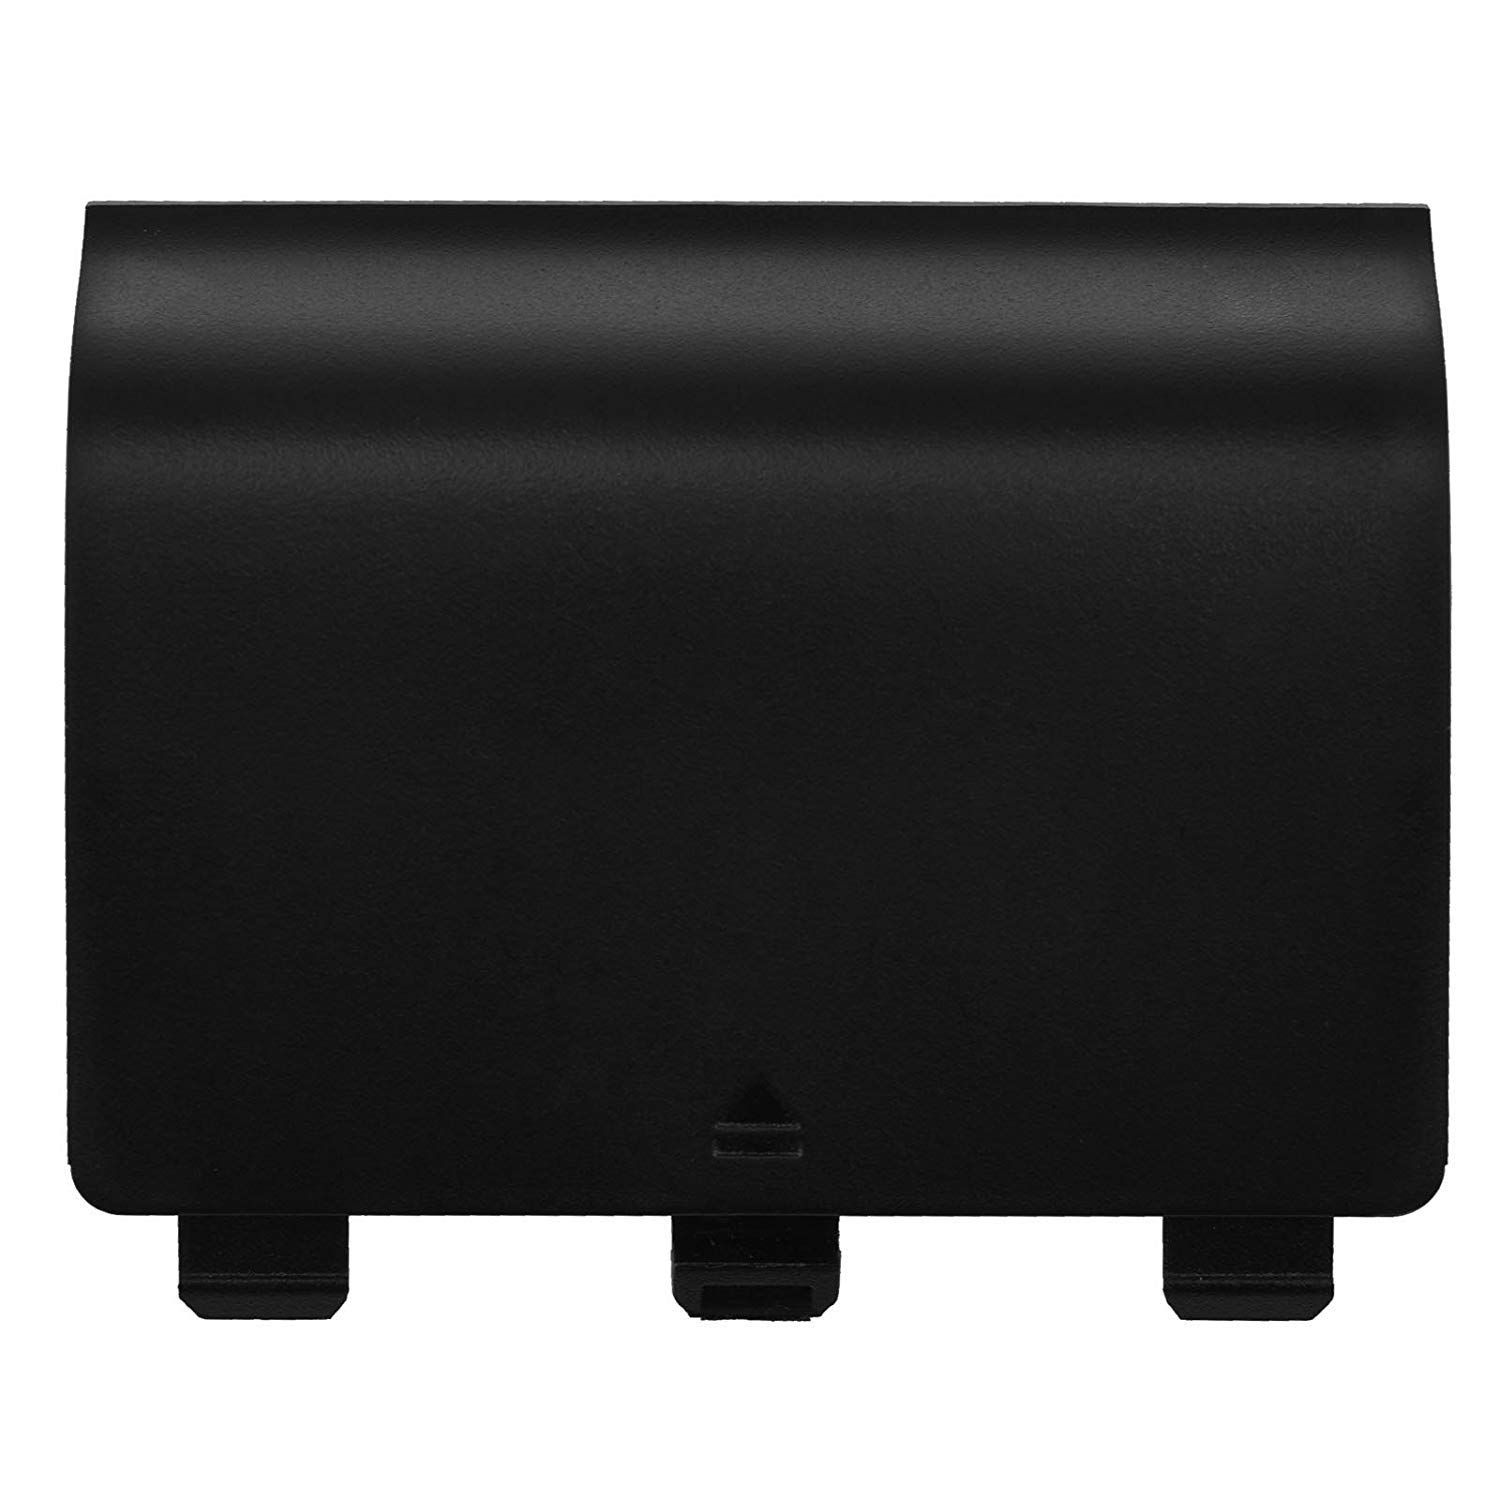 New World Xbox One Controller Replacement Battery Pack Case Cover Shell - Black [video game]